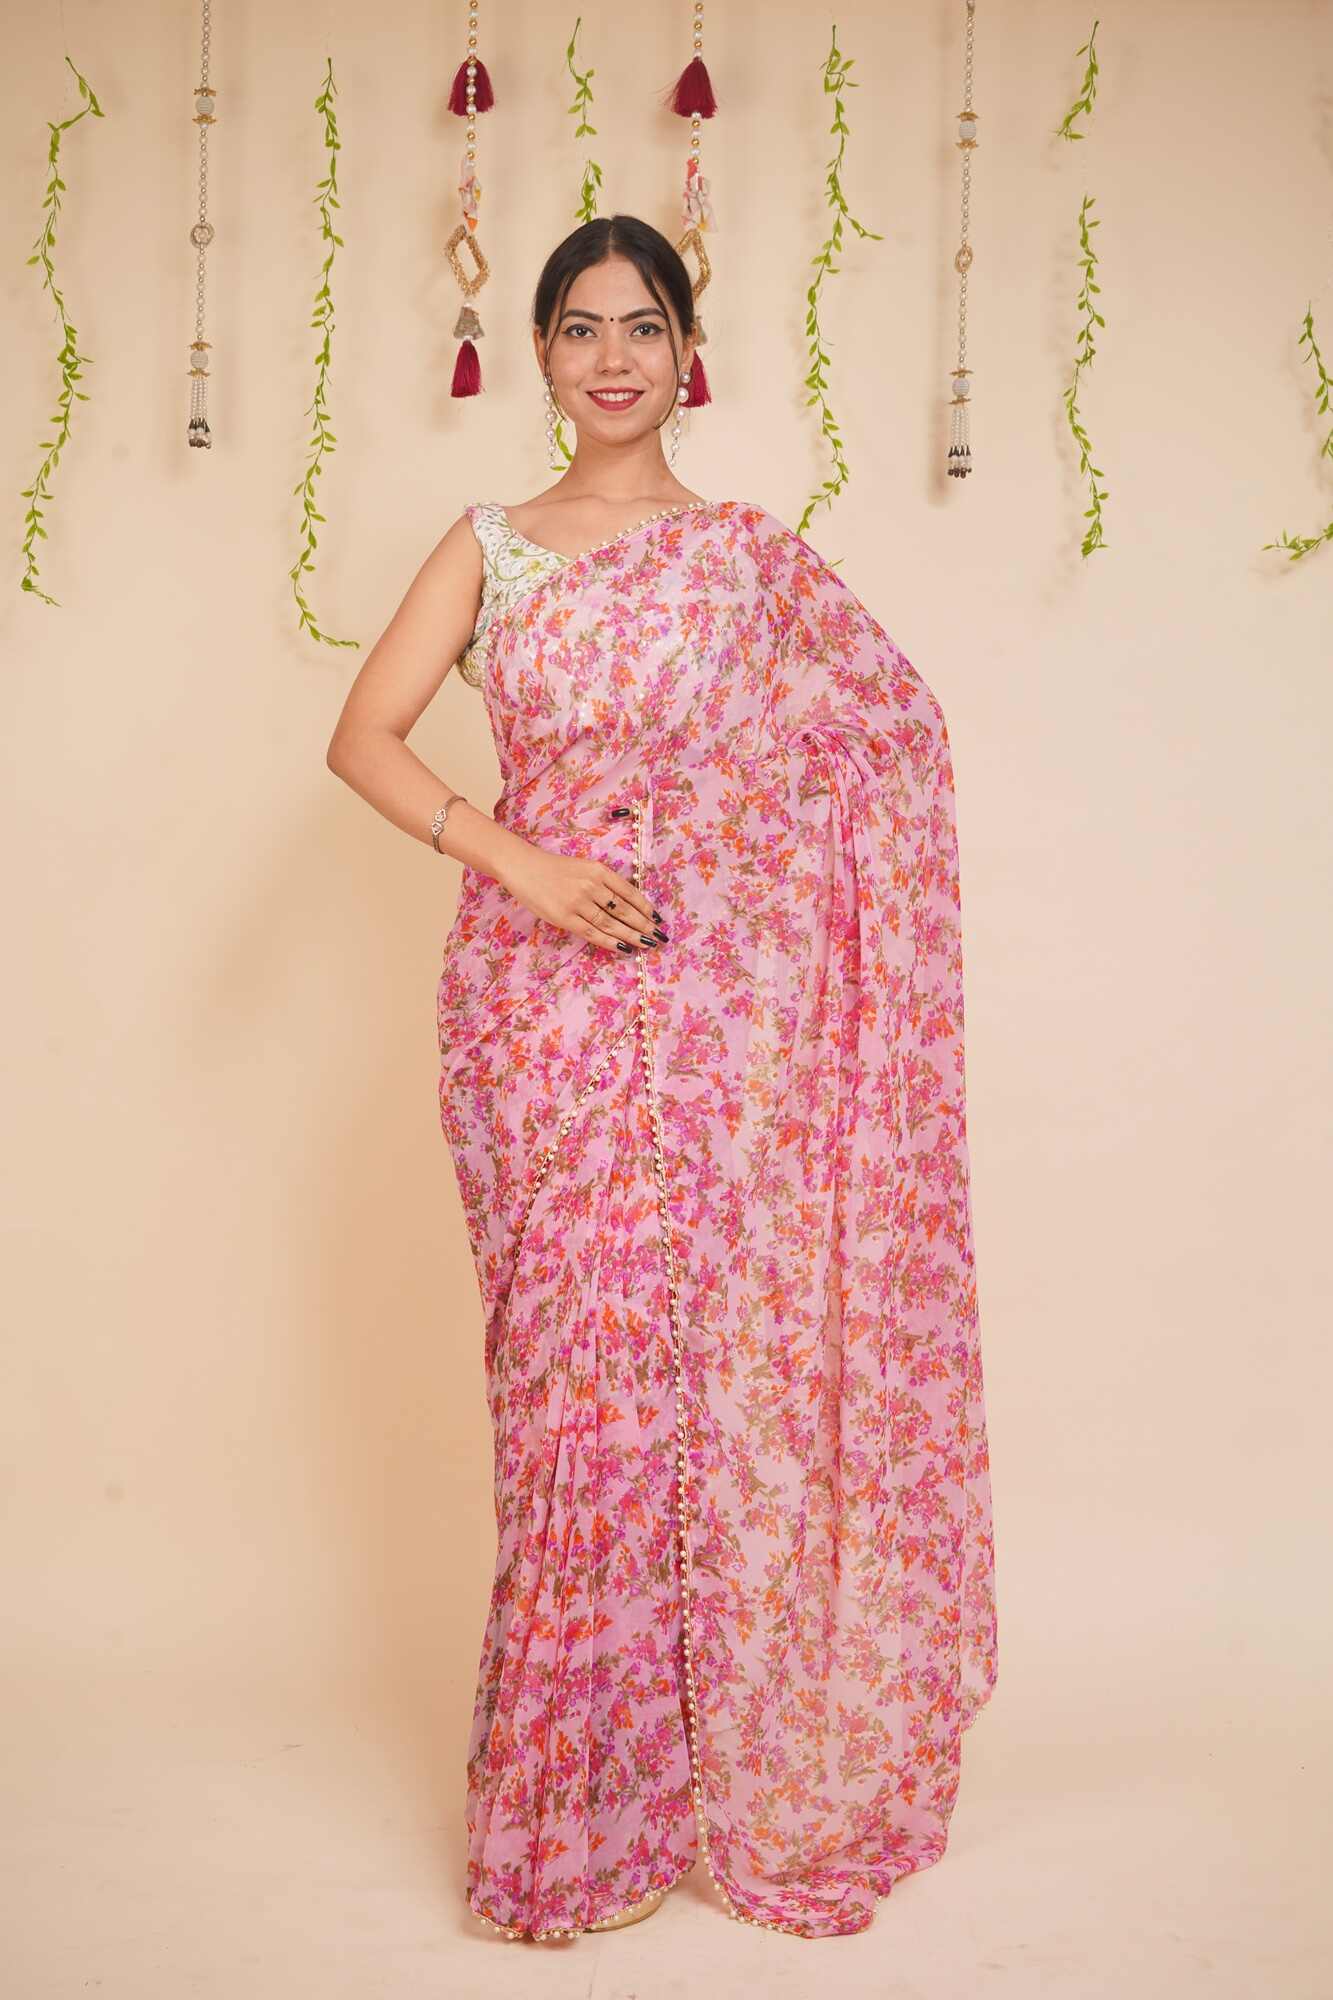 Appealing Pink Georgette Floral Printed Saree with Moti Lace Wrap in 1 minute Saree with Readymade Blouse - Isadora Life Online Shopping Store